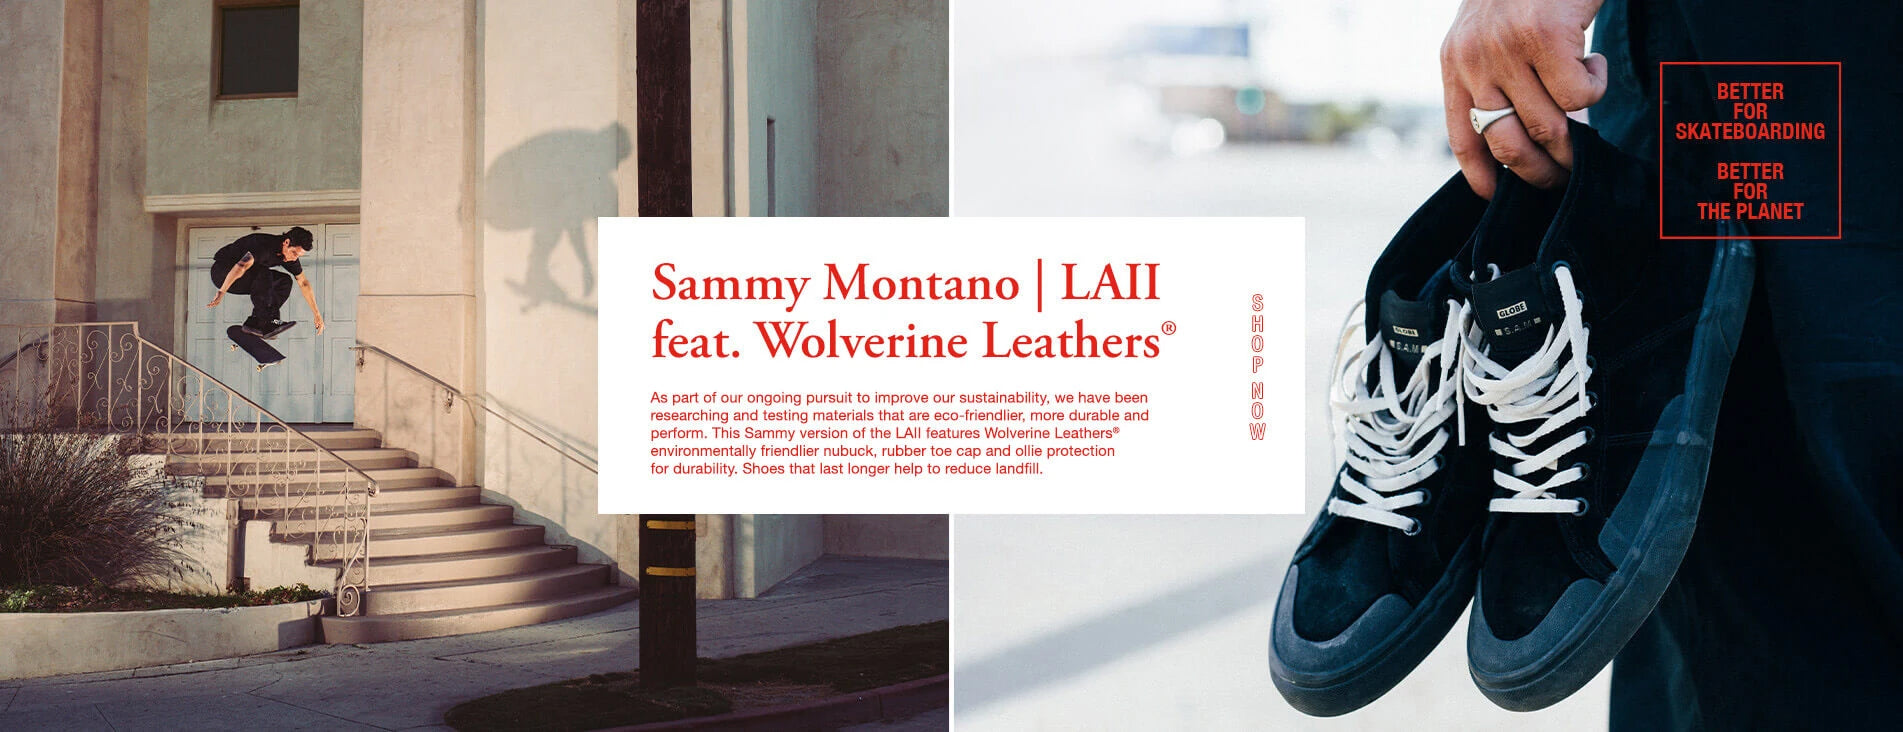 Globe Sammy Montano | Los Angered II Featuring Wolverine Leathers®